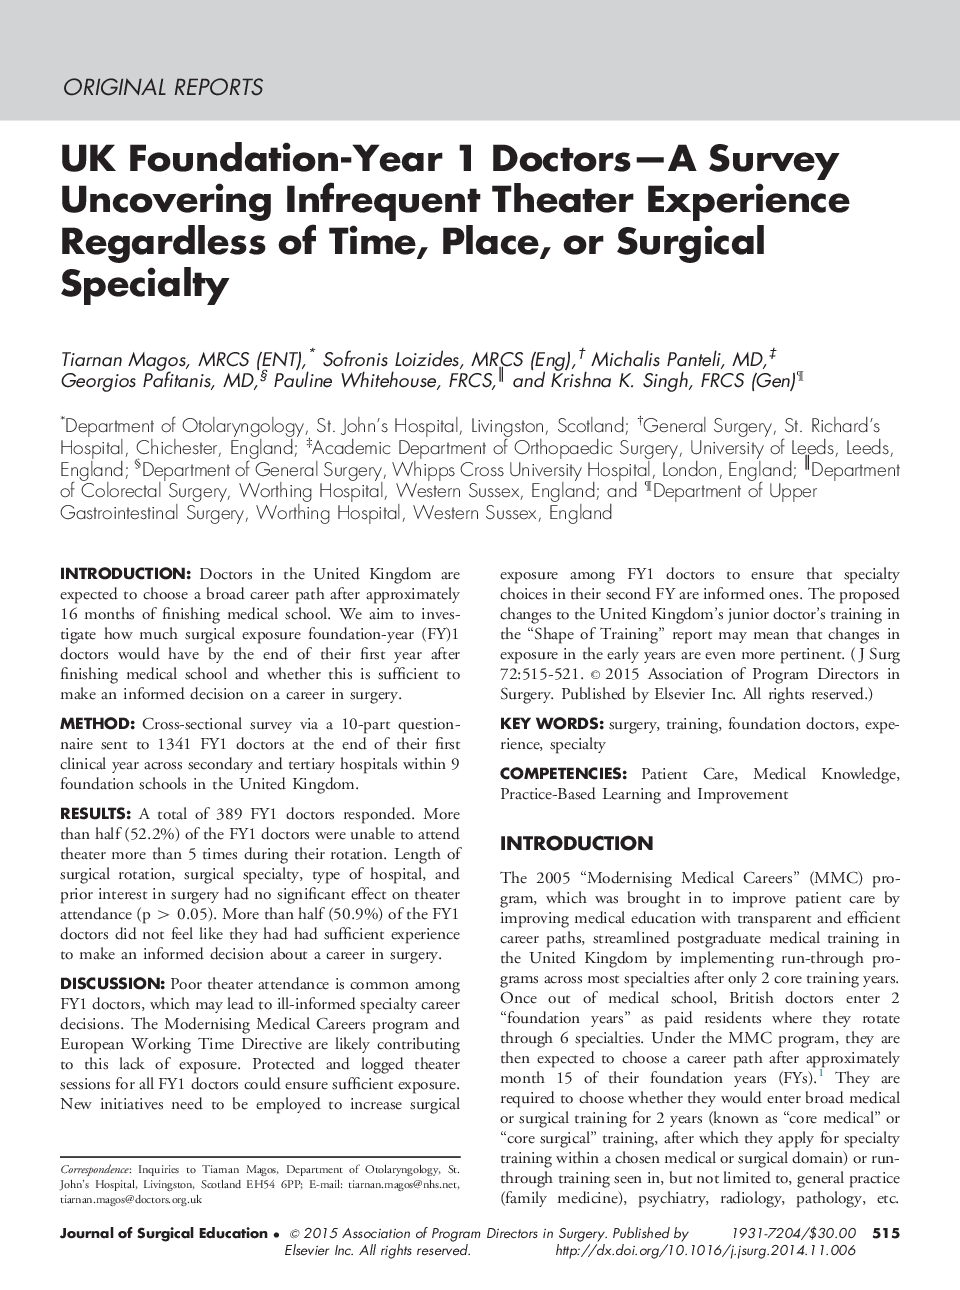 UK Foundation-Year 1 Doctors—A Survey Uncovering Infrequent Theater Experience Regardless of Time, Place, or Surgical Specialty